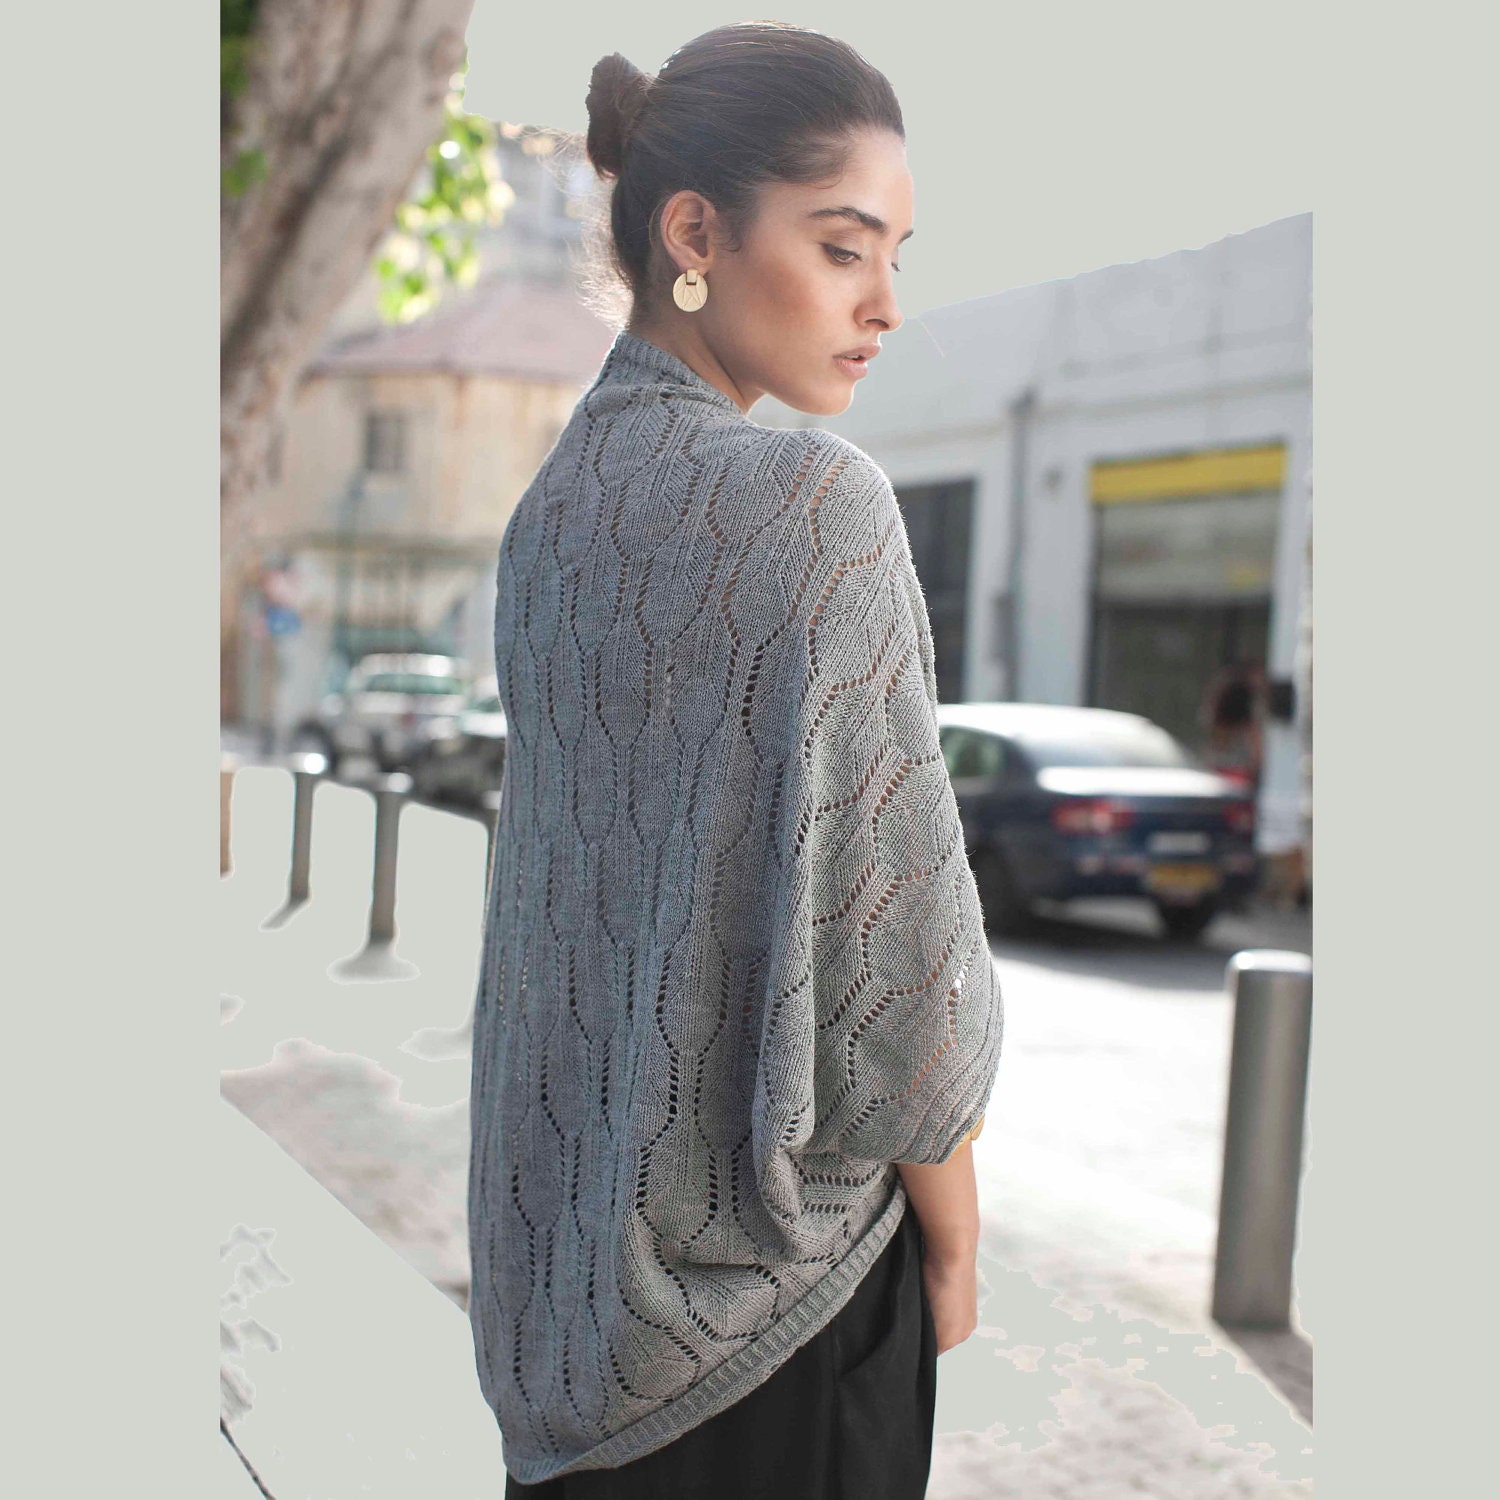 Women summer knitted cardigan, grey jacket, one size fits all - AndyVeEirn